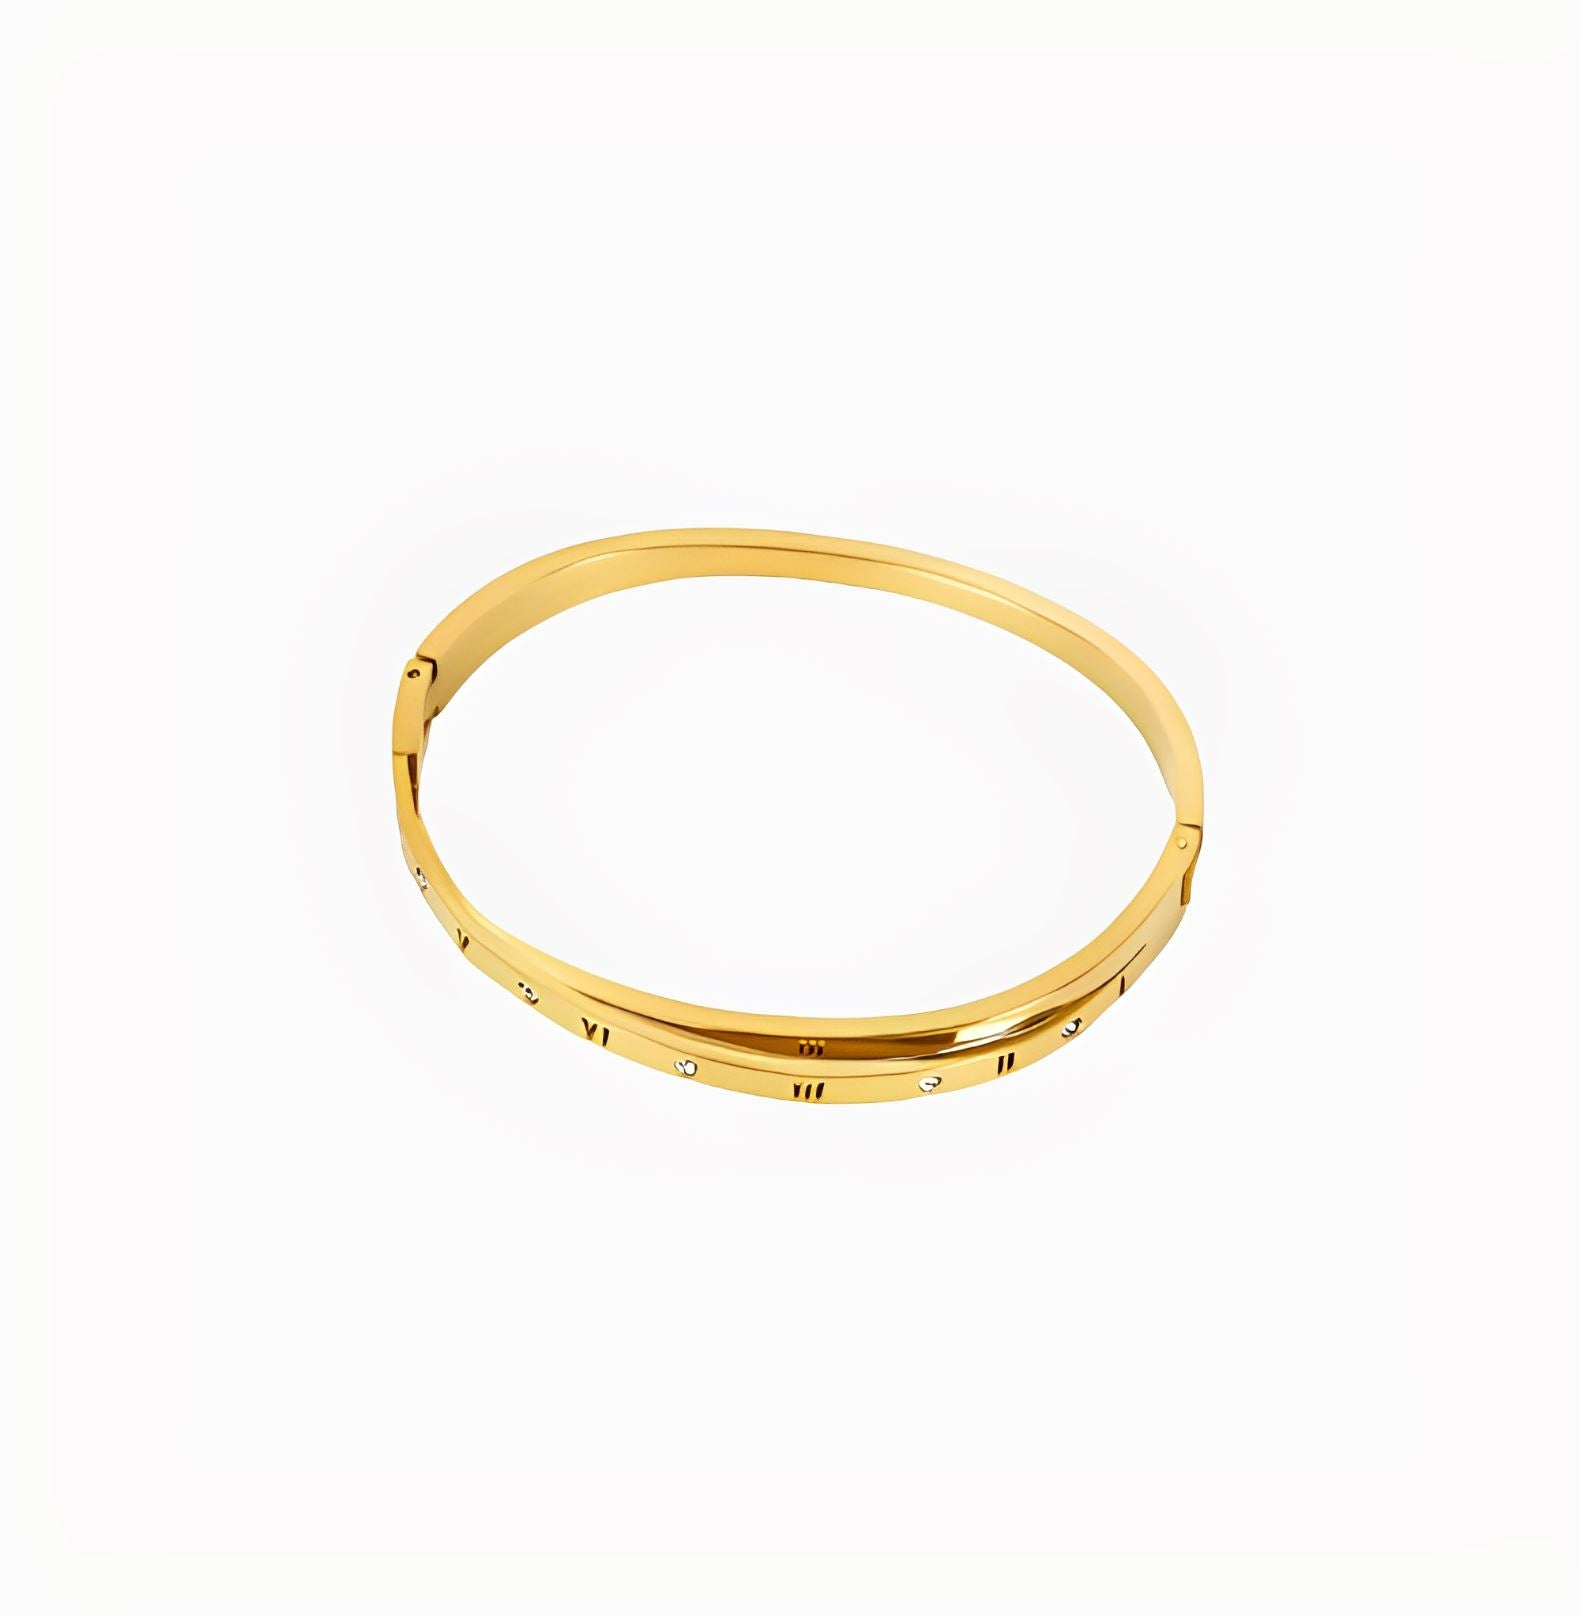 ROMAN NUMERAL BANGLE BRACELET braclet Yubama Jewelry Online Store - The Elegant Designs of Gold and Silver ! 